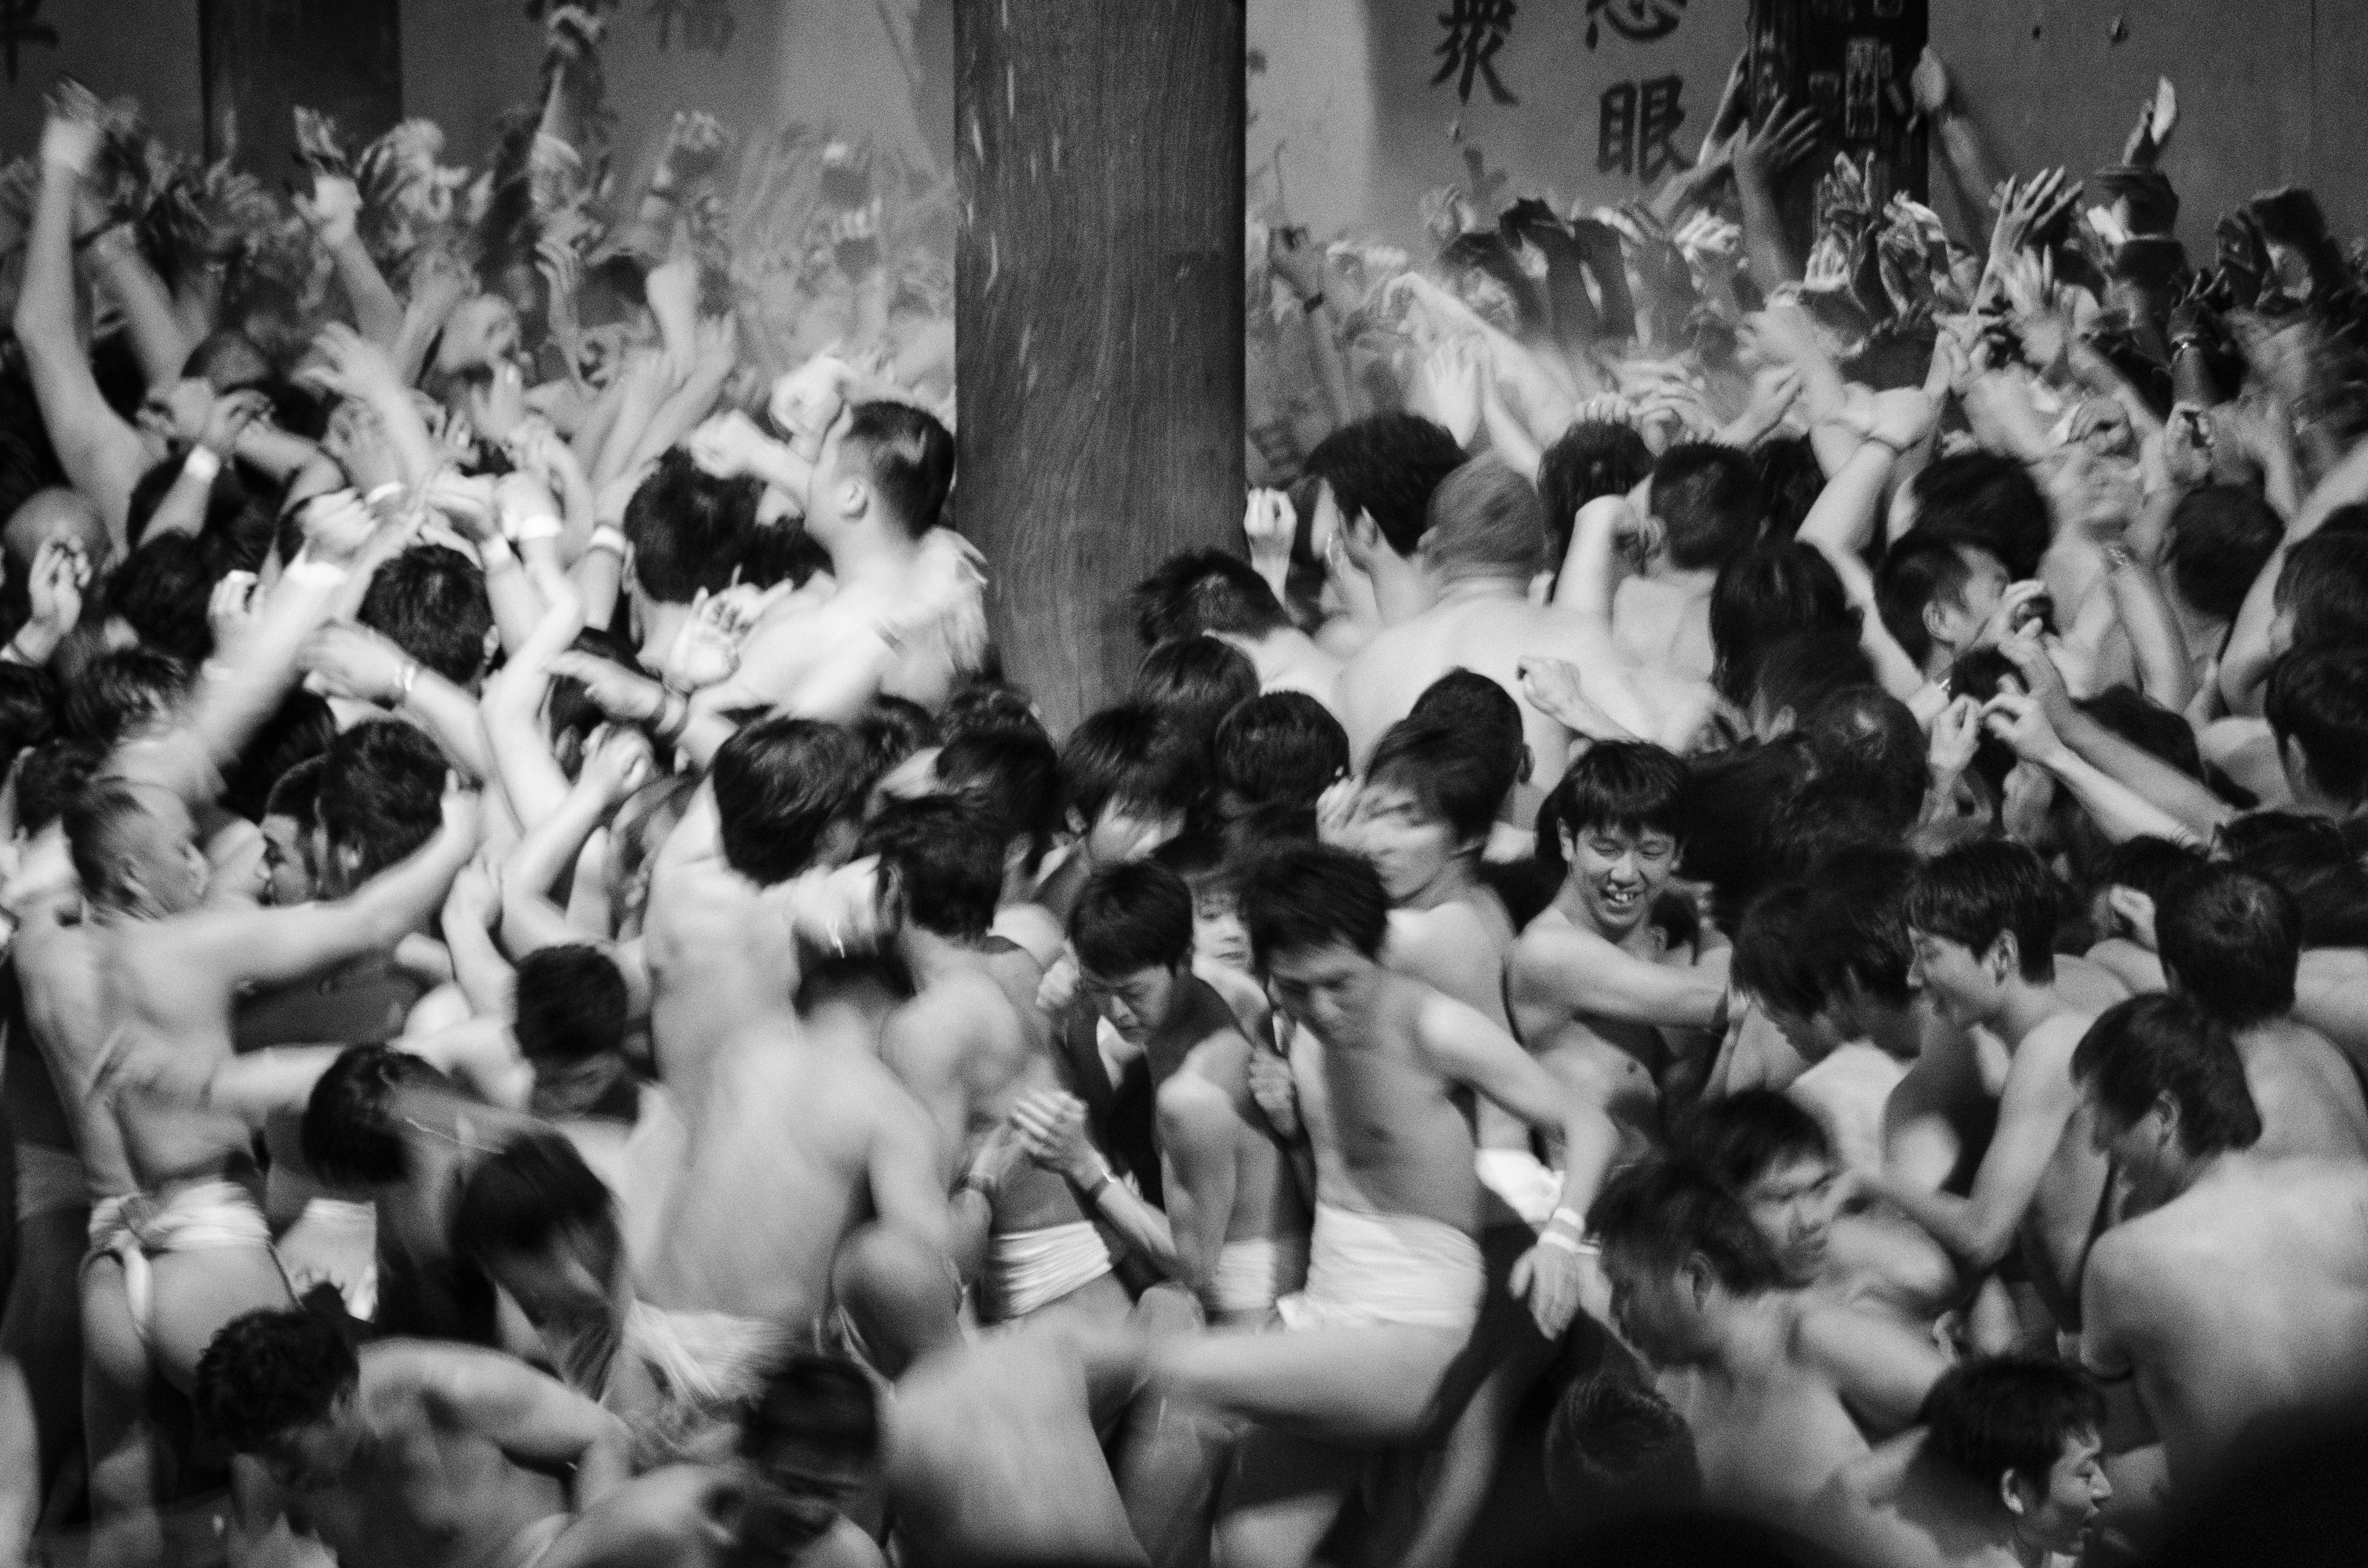 Photo by Kurt K. Gledhill Hadaka Matsuri, Japan During this ‘Naked Festival’, held in February in Okayama, almost 10,000 men crowd together, forming a colossal mosh pit of hope and kinship. Clad in white loincloths, they purify their bodies with cold water and cram together to try to grab a pair of lucky wooden sticks (shingi) thrown by a priest. Each member of the vigorously chanting crowd believes that a year’s worth of good luck comes to whoever catches the shingi. Reaching out in boisterous anticipation, each man hopes the luck will come to them.